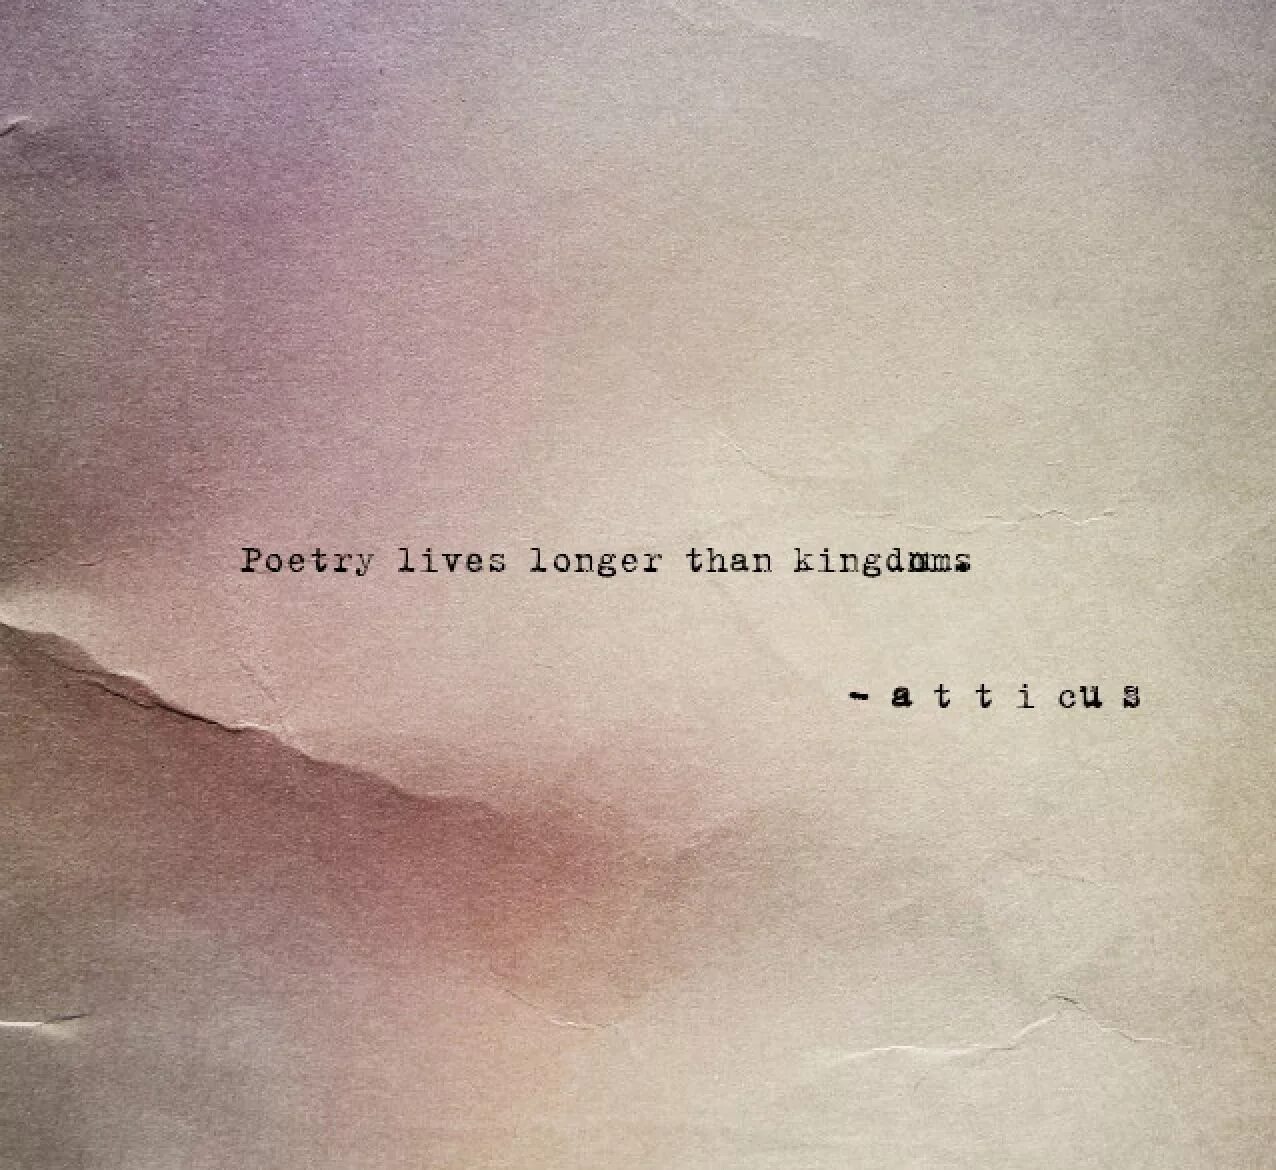 They lived long and life. Poem Life. Kingdom Live poem. Live and Live poem. Poetic Words Music.